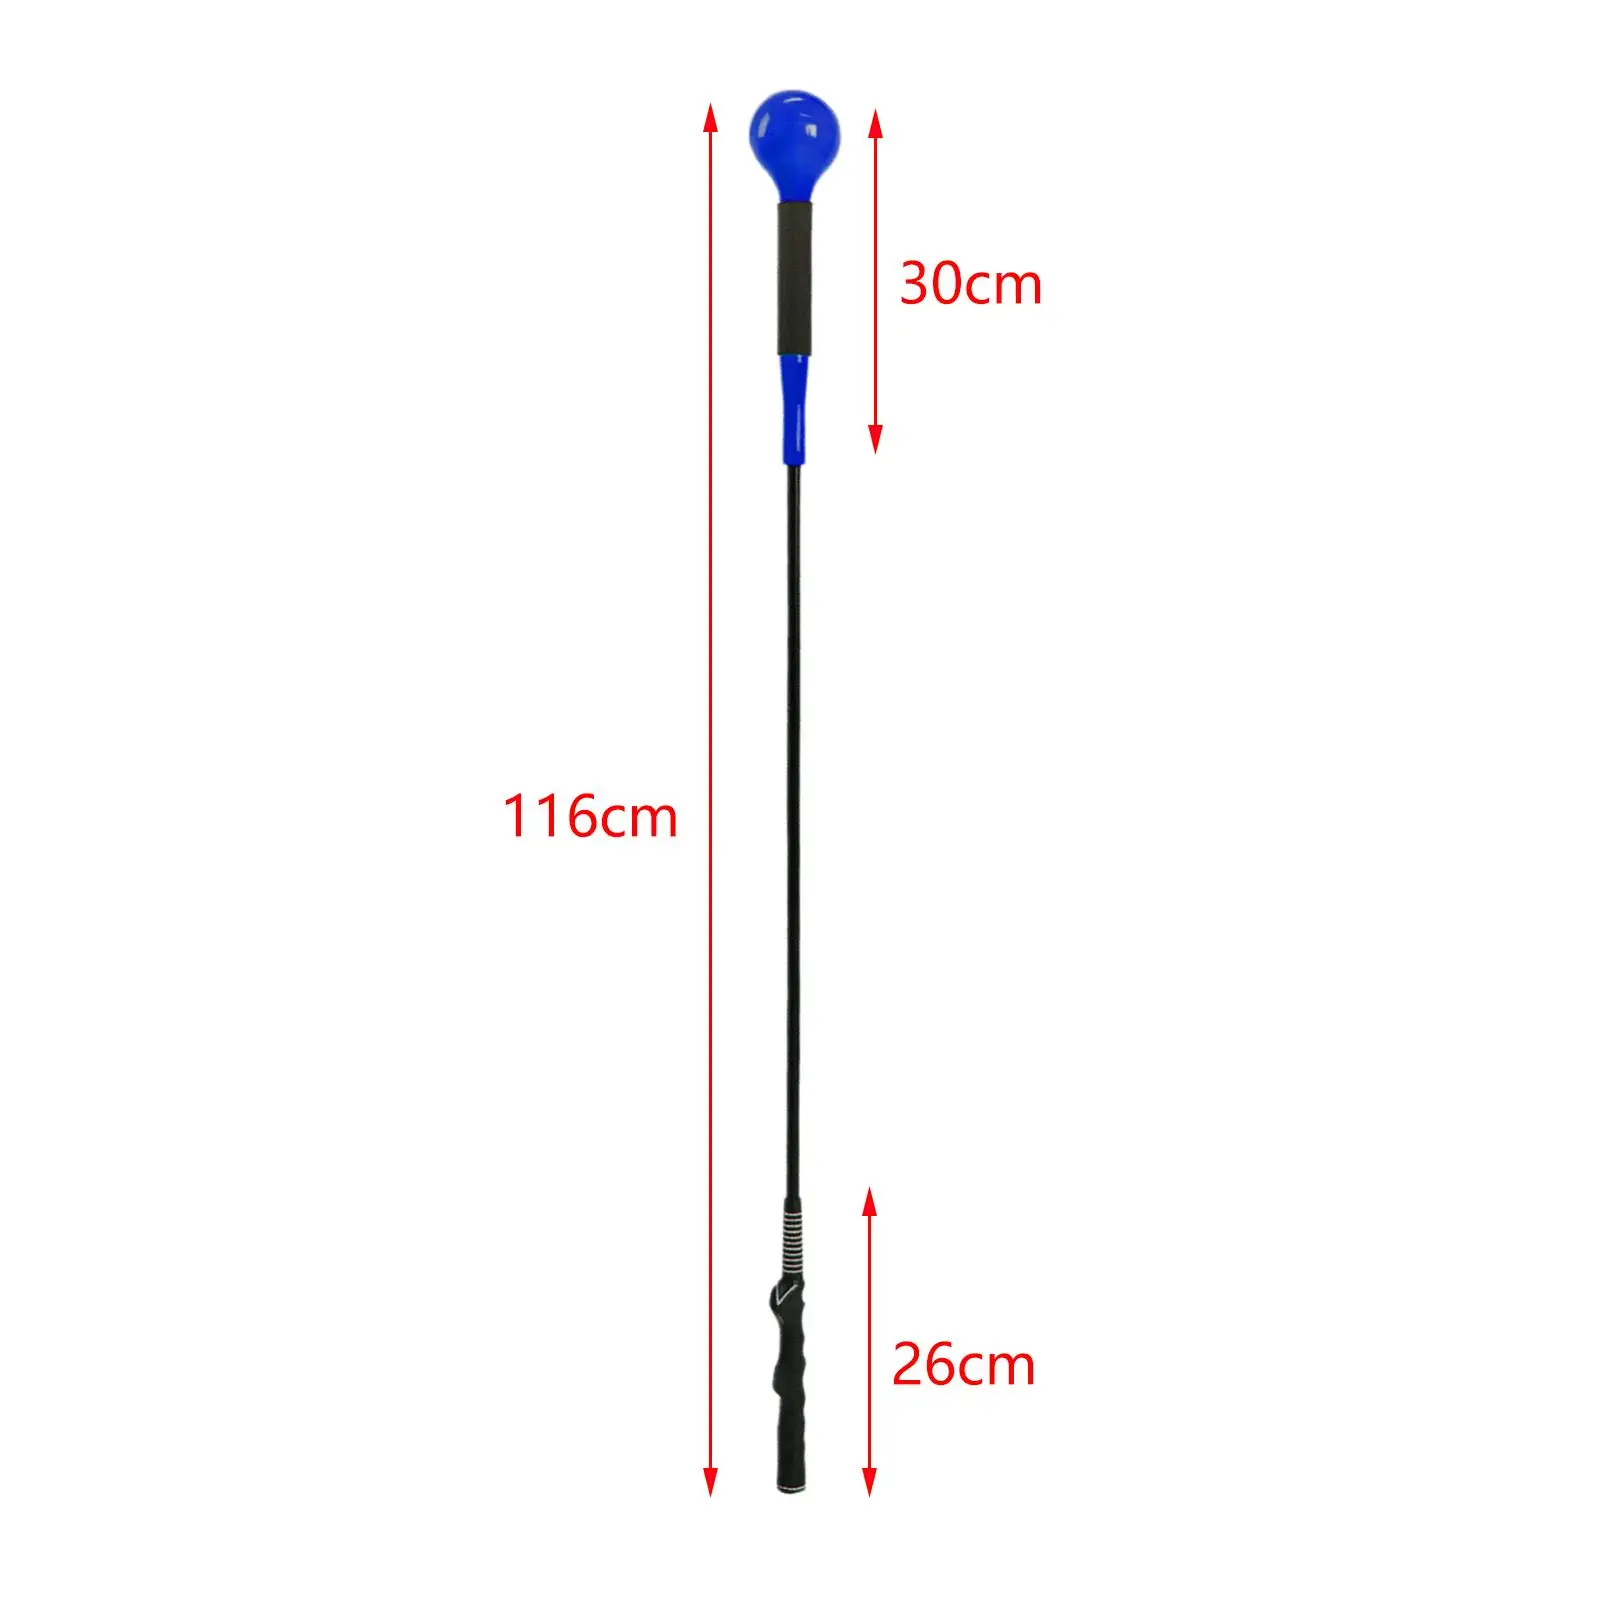 Golf Swing Trainer Strength Trainer Length 116cm Posture Corrector Golf Practice Rod for Enthusiast Outdoor Golfer Men Chipping